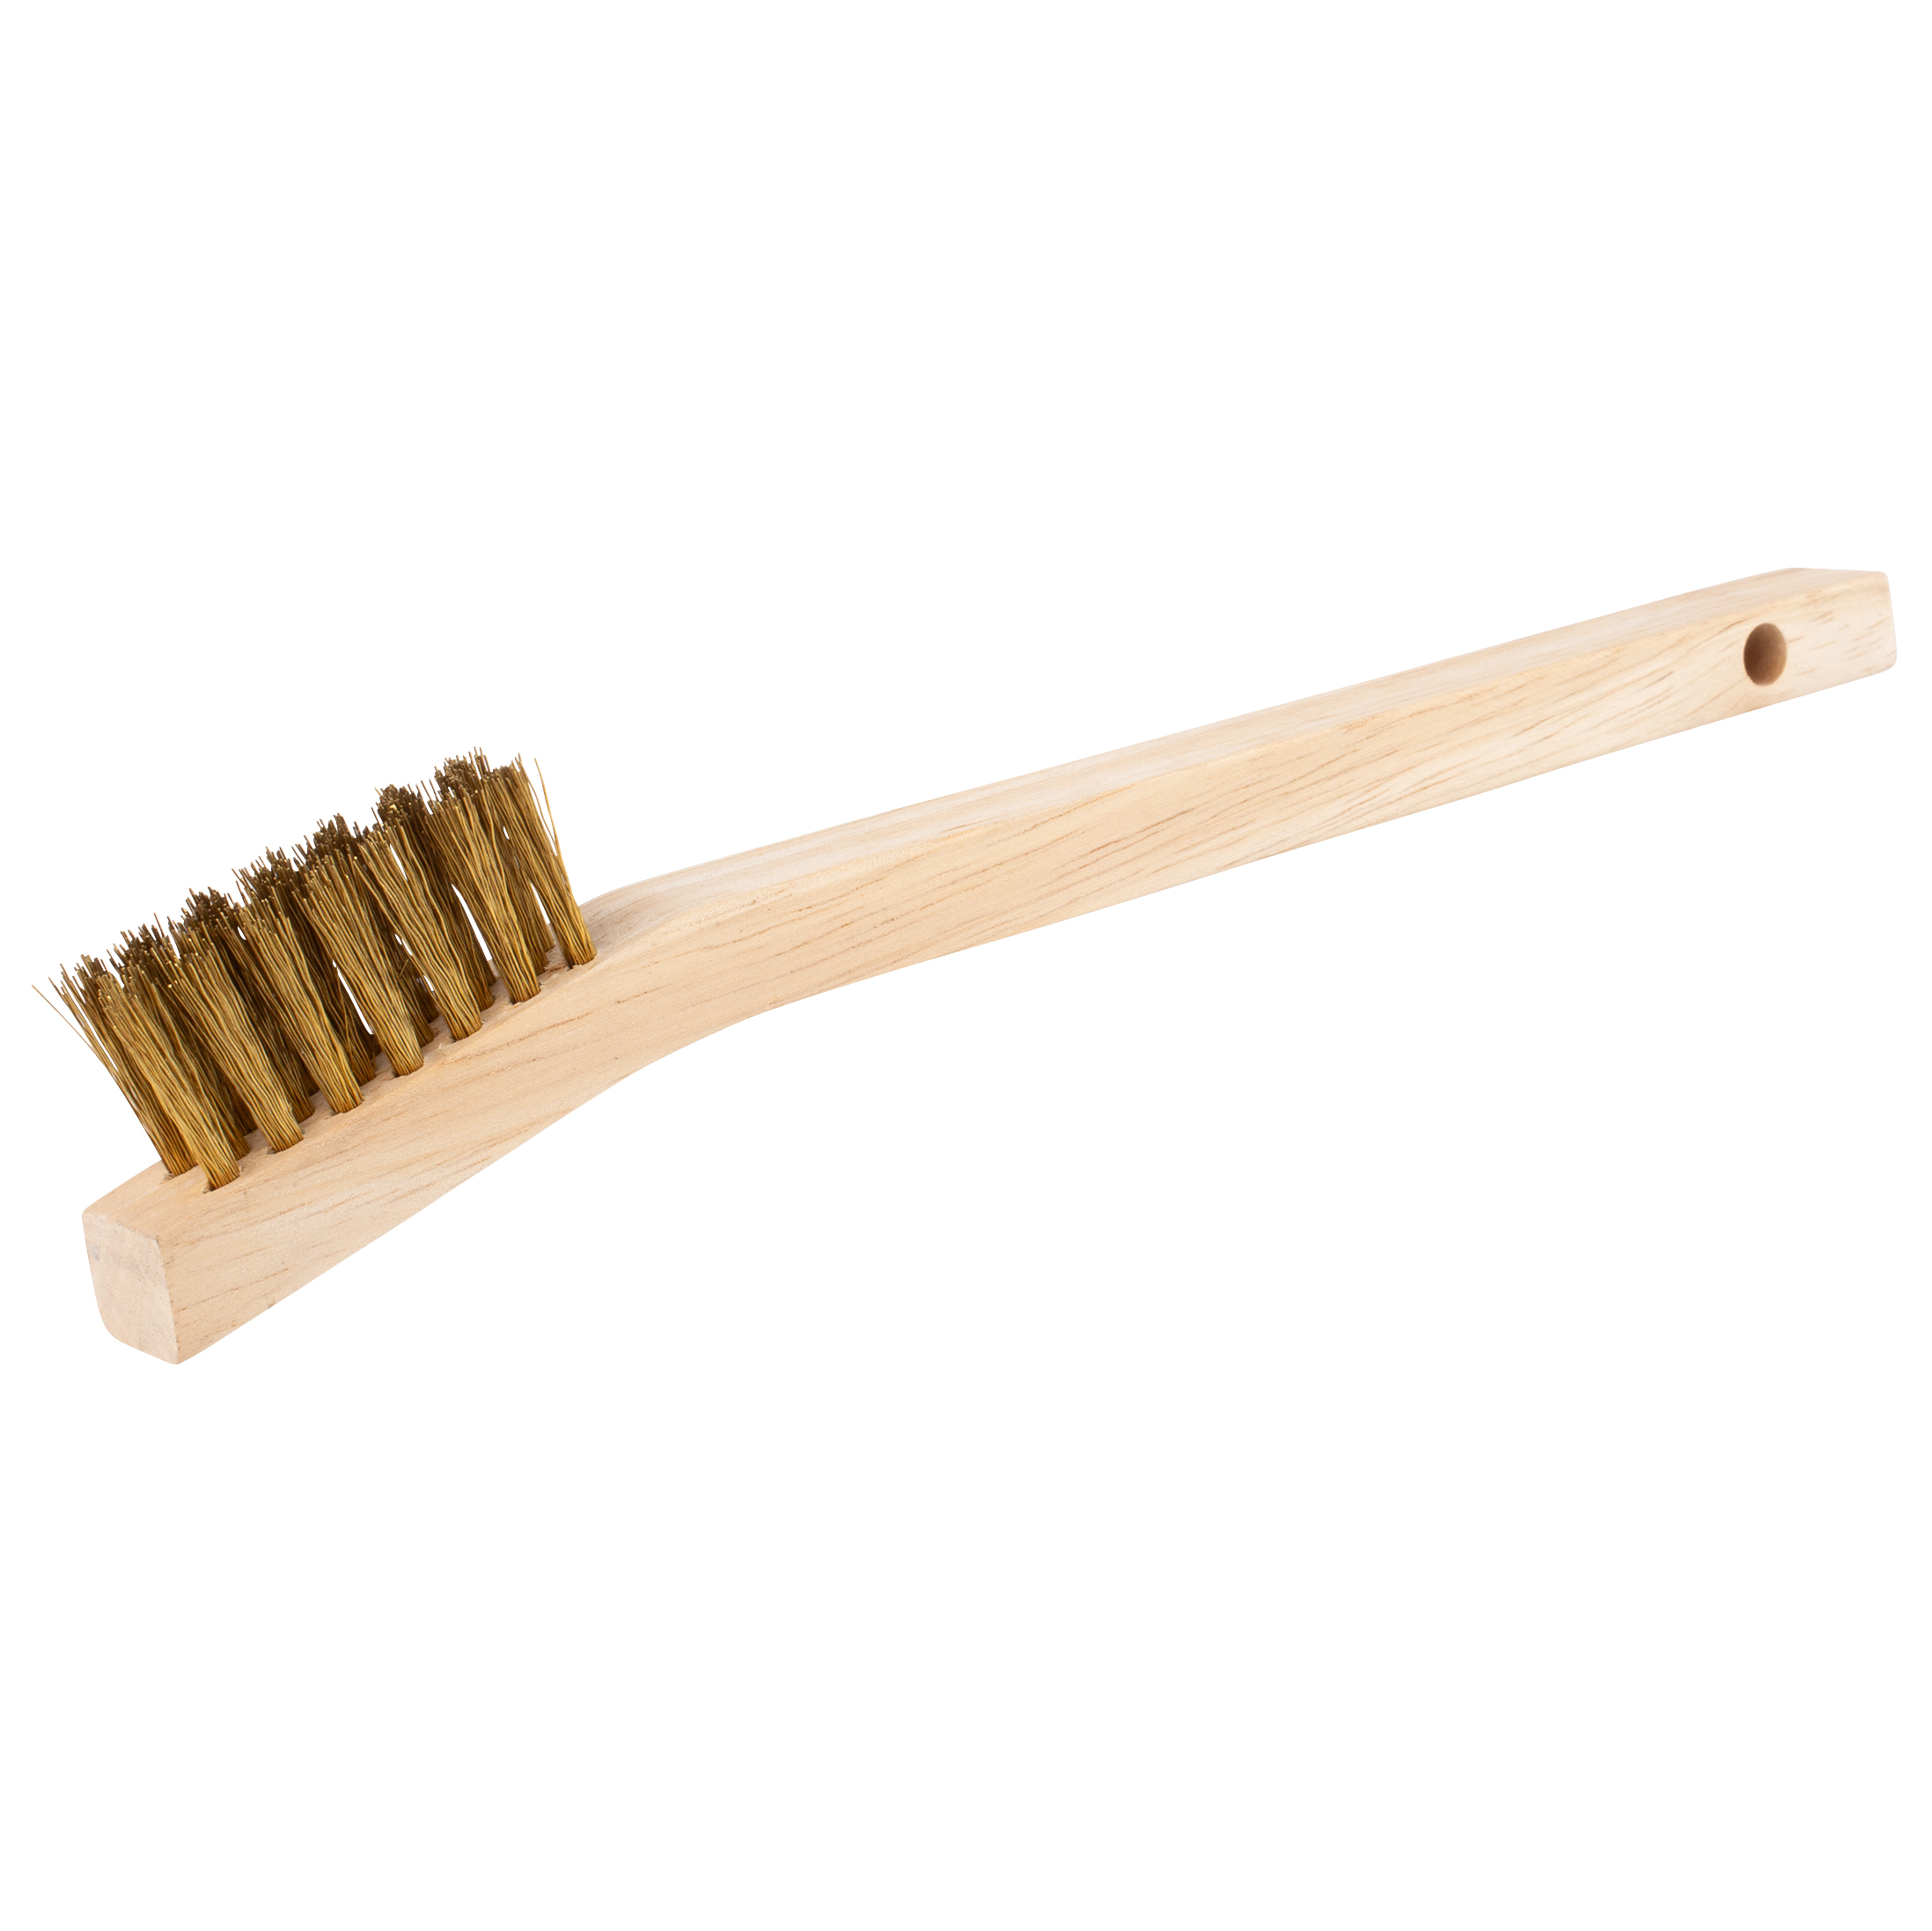 Small Brass Scratch Brush - 7 1/4 with Wooden Handle. - Shark Industries